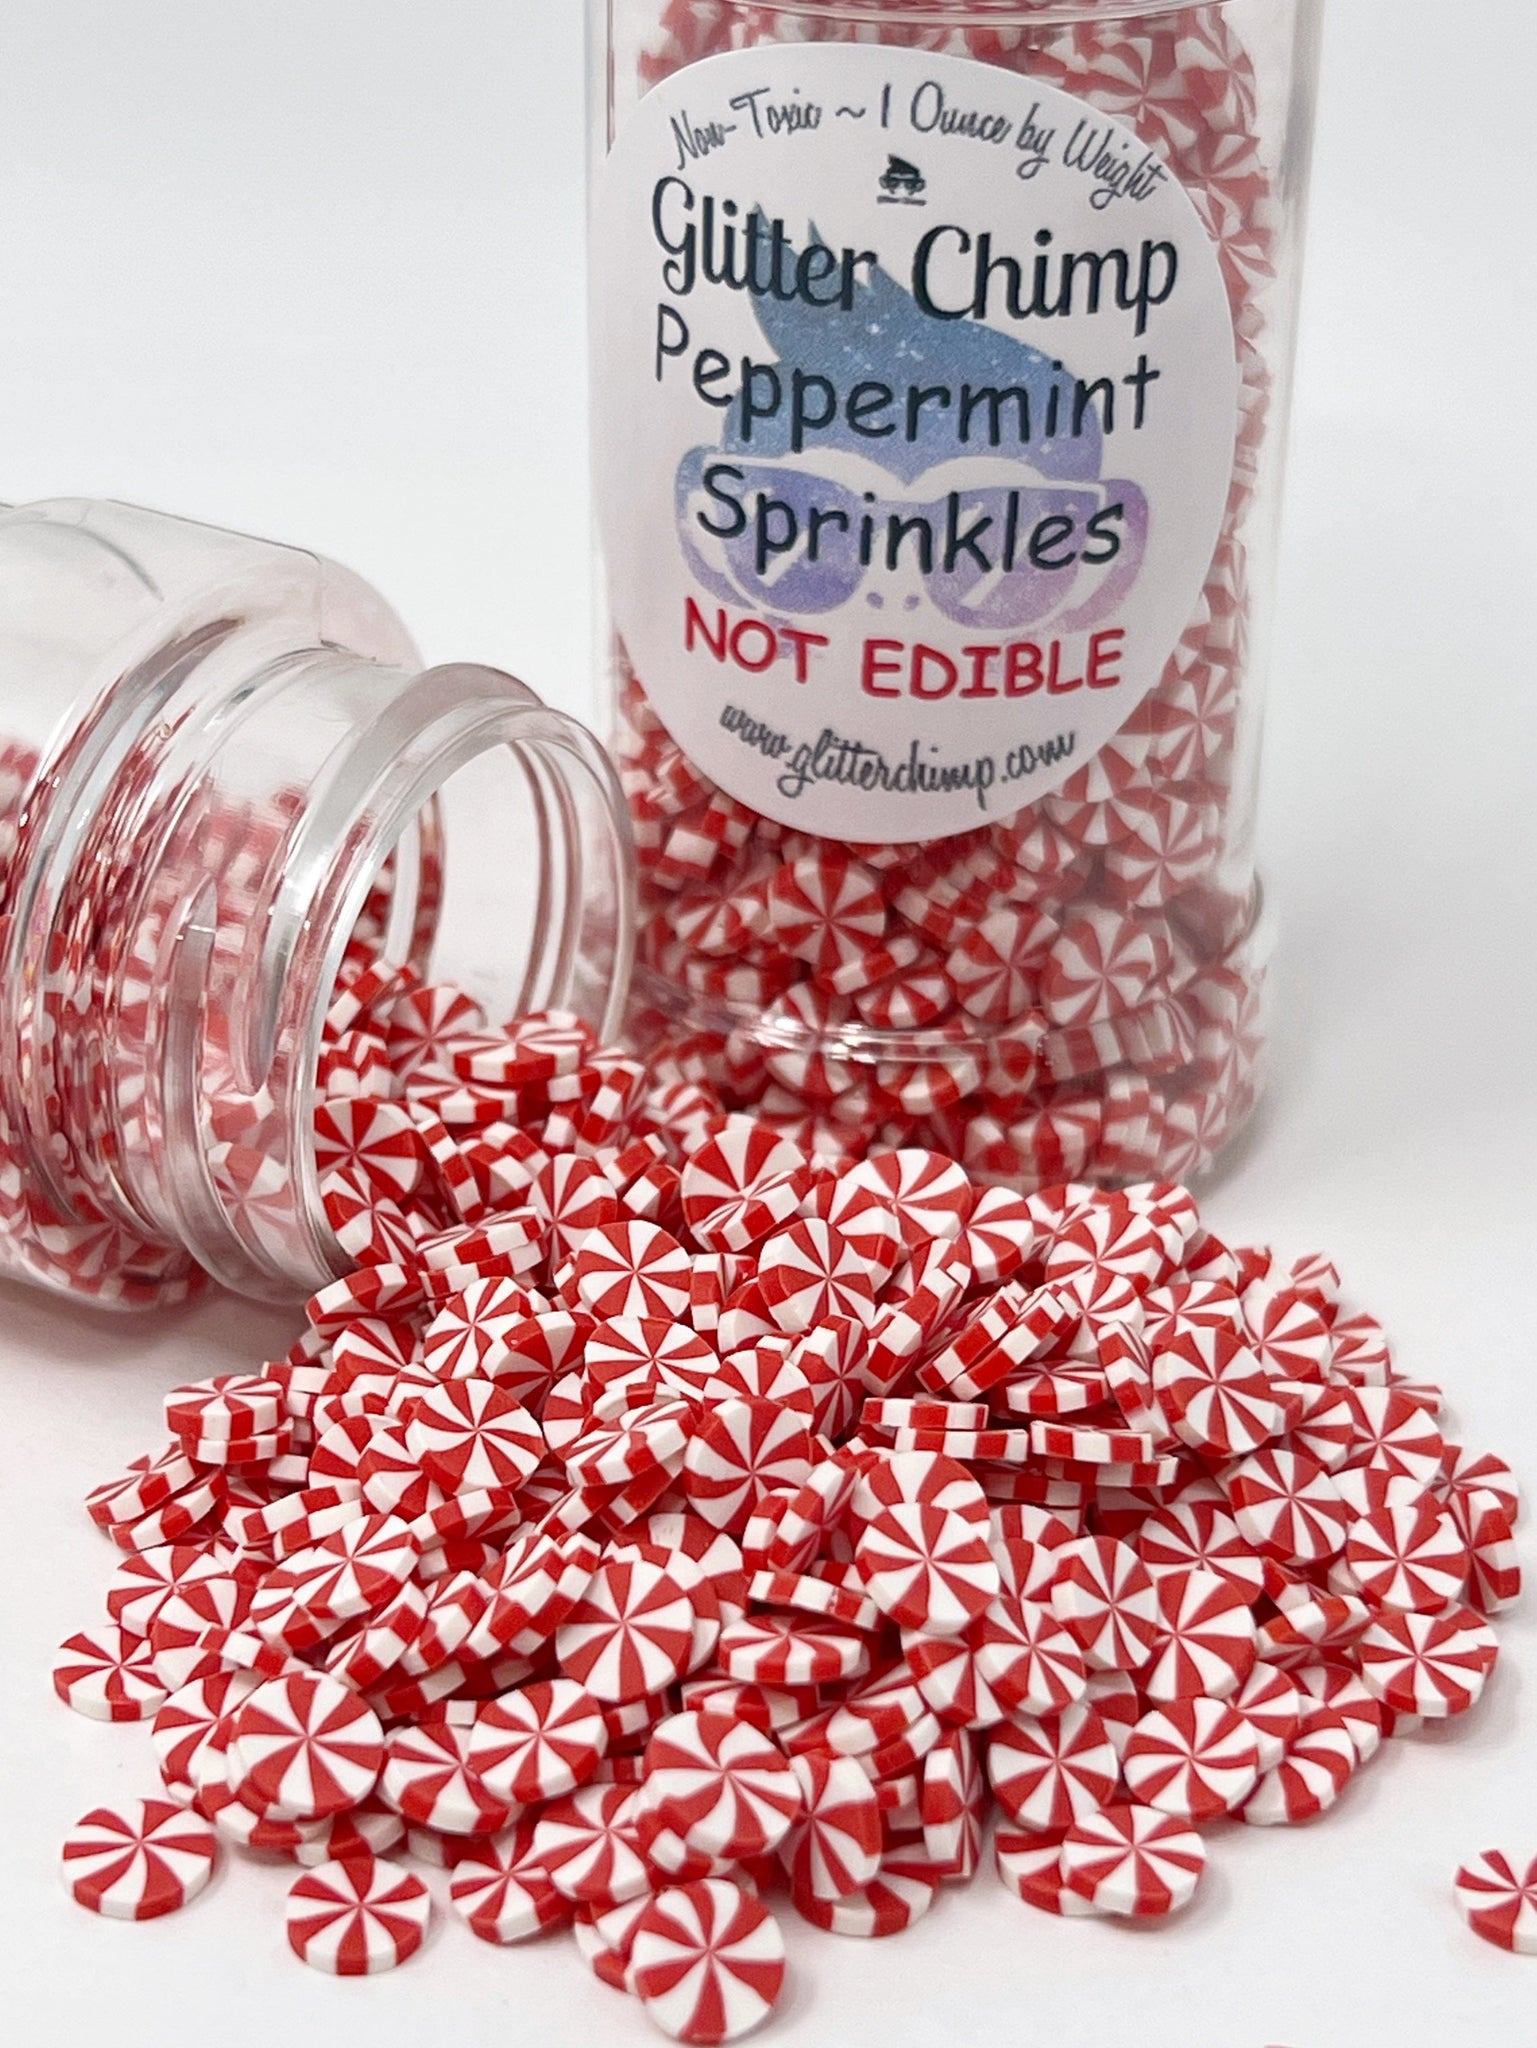 Mixed Star Sprinkles - Faux Craft Toppings – Glitter Chimp